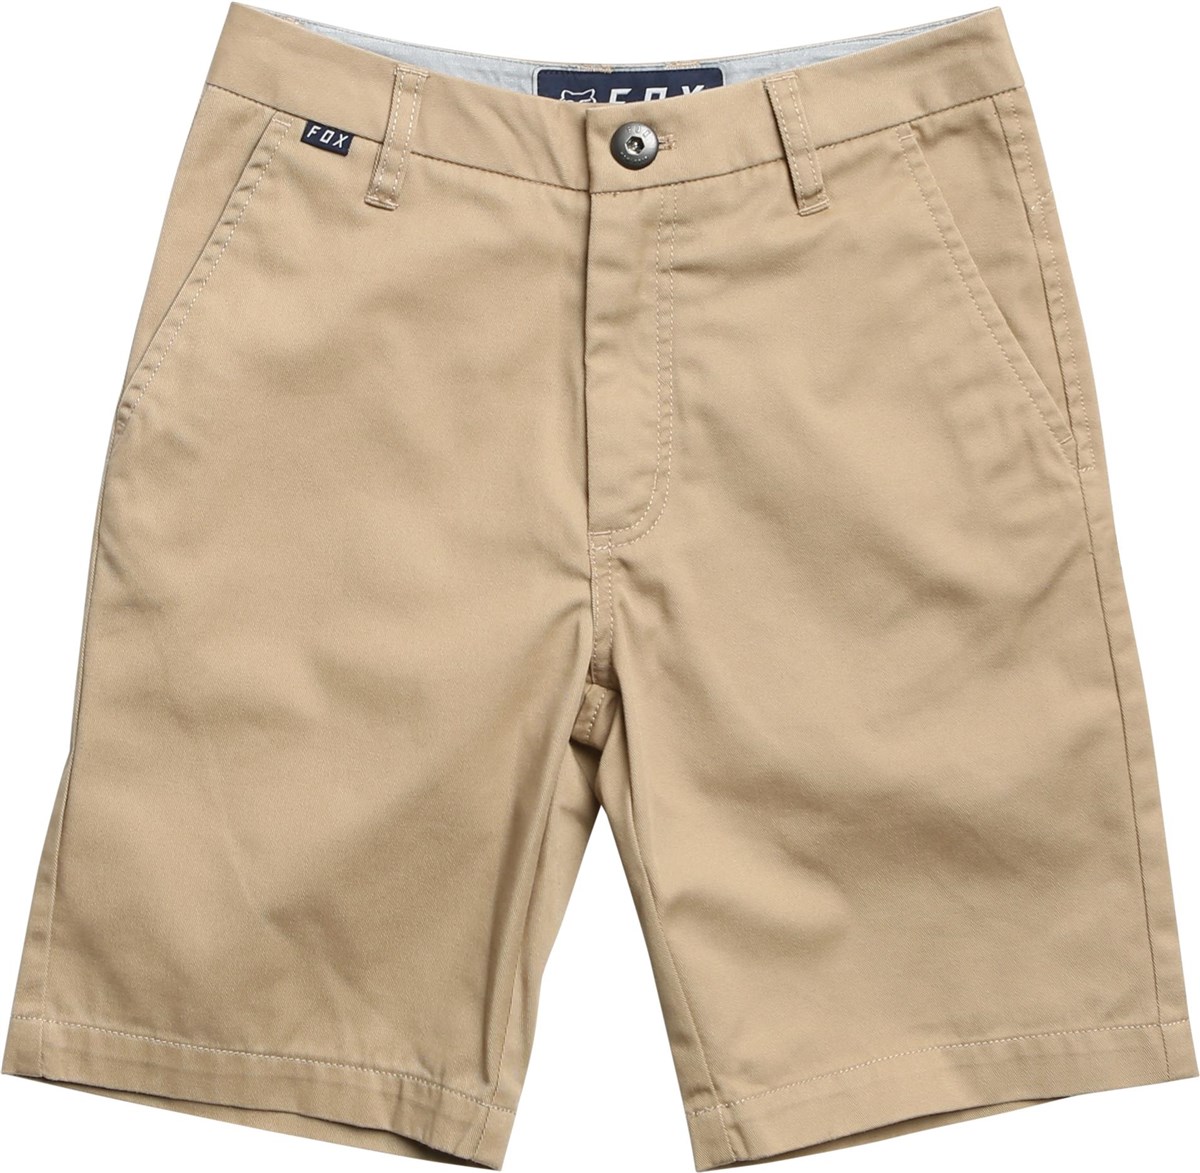 Fox Clothing Essex Youth Shorts product image